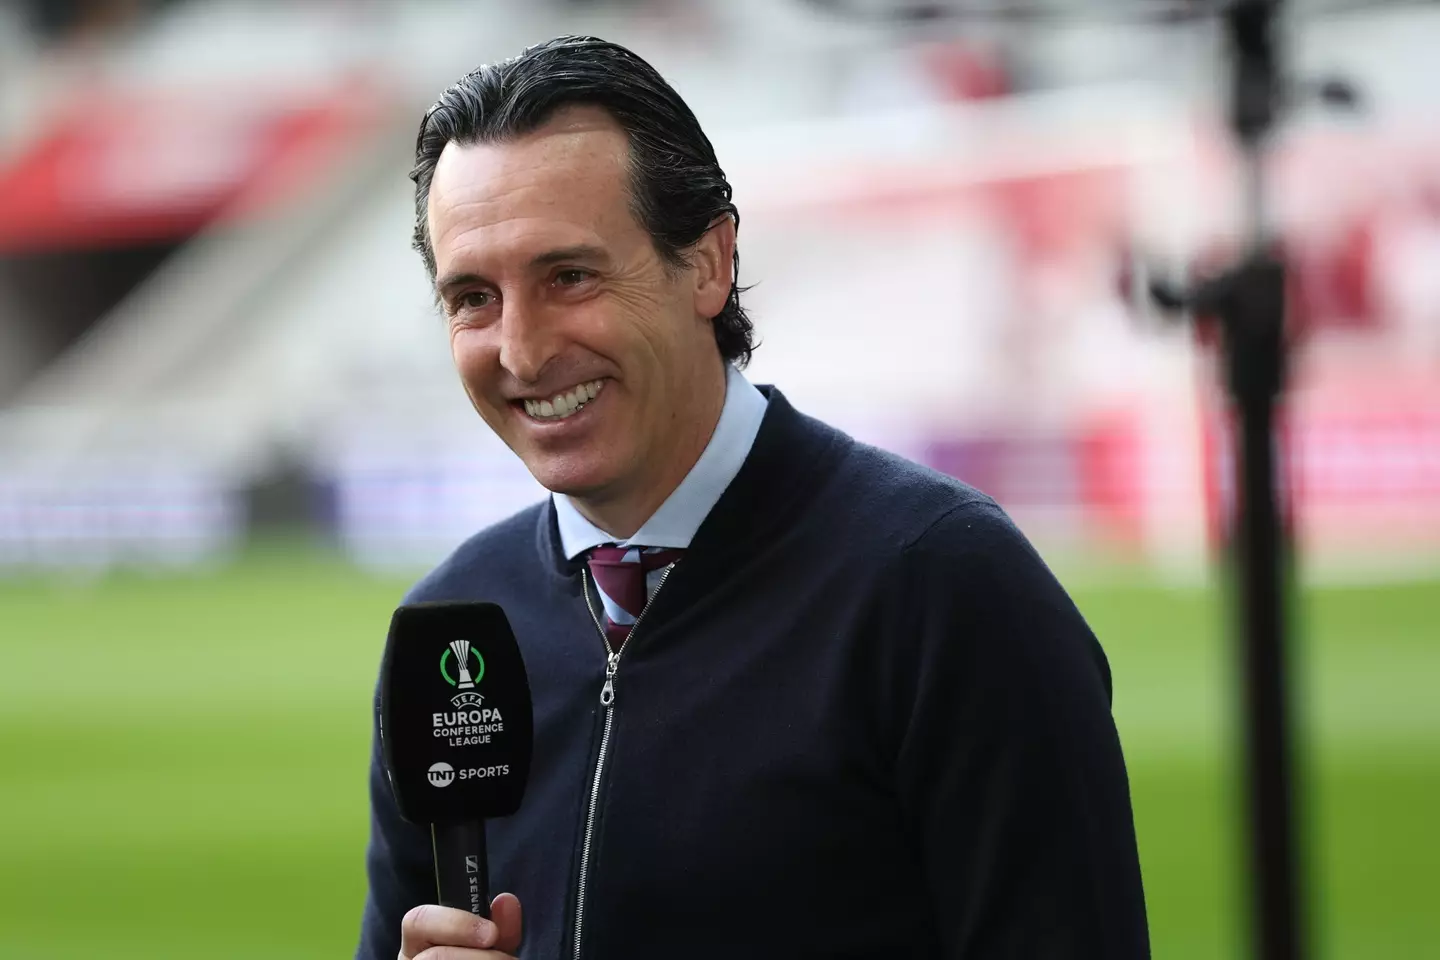 Unai Emery has signed a contract extension with Aston Villa. (